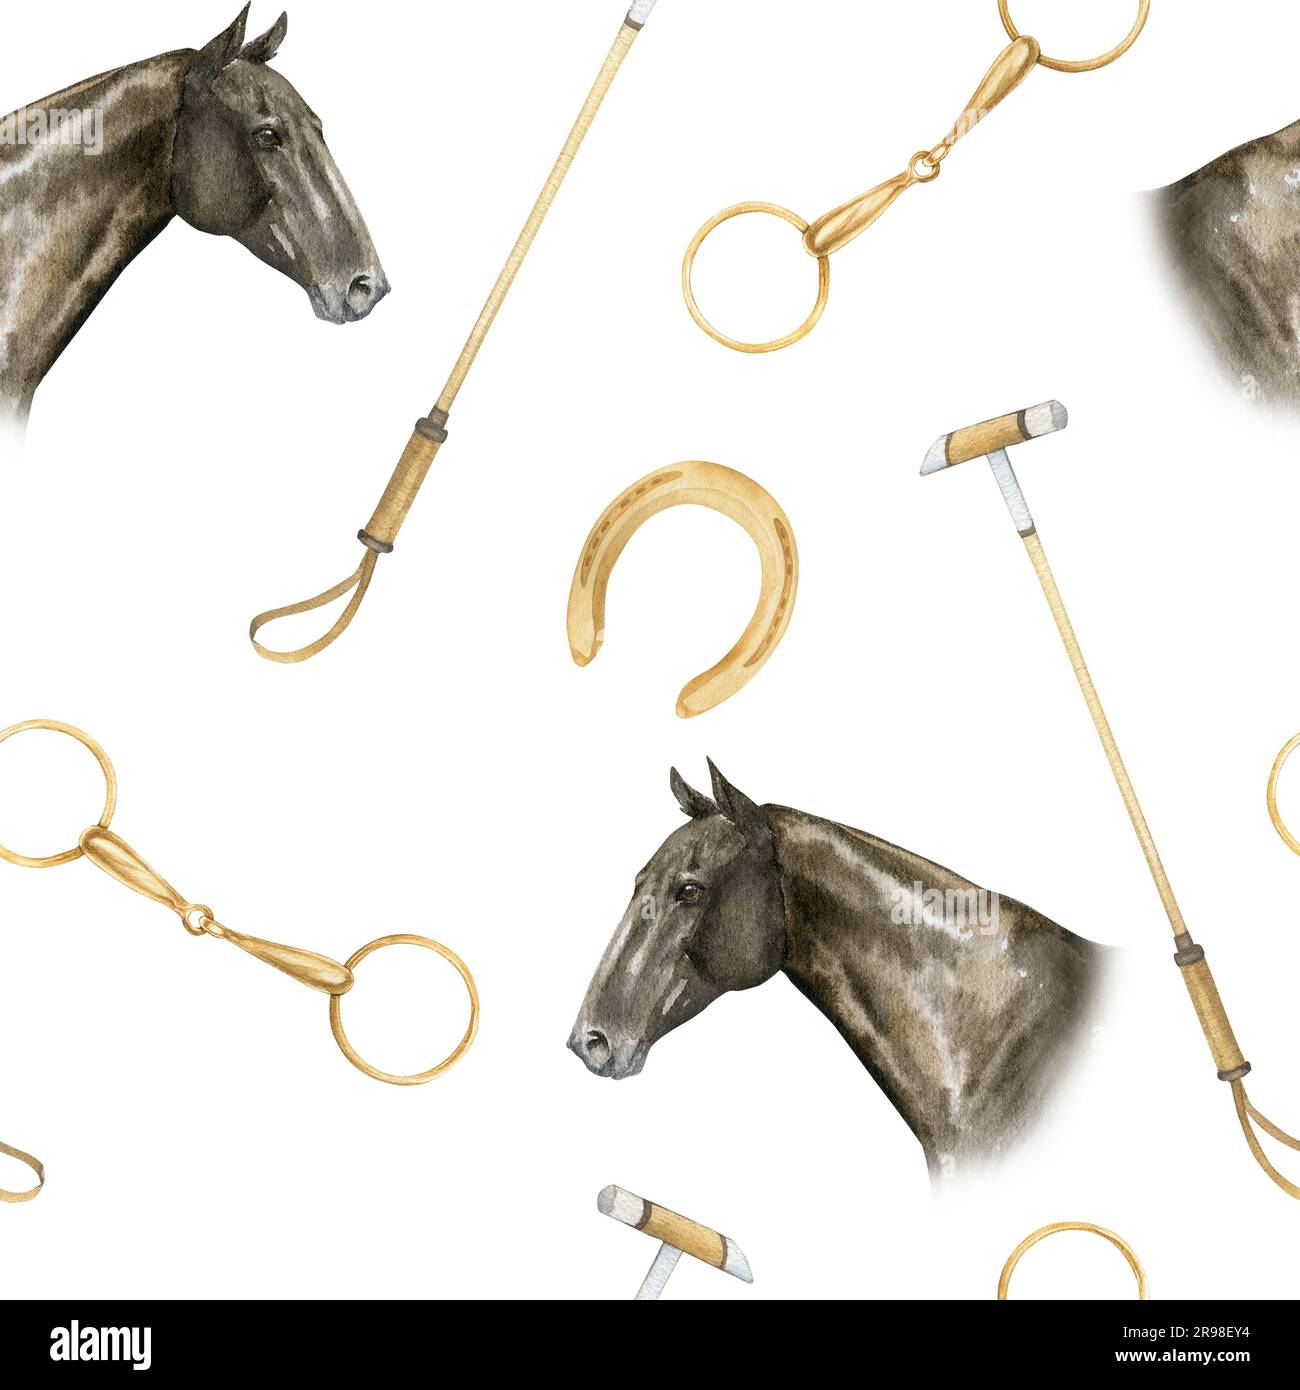 Seamless minimalistic pattern with watercolor illustrations of golden horseshoes and snaffles, horse polo sticks , horse portrairs, isolated. Print on Stock Photo